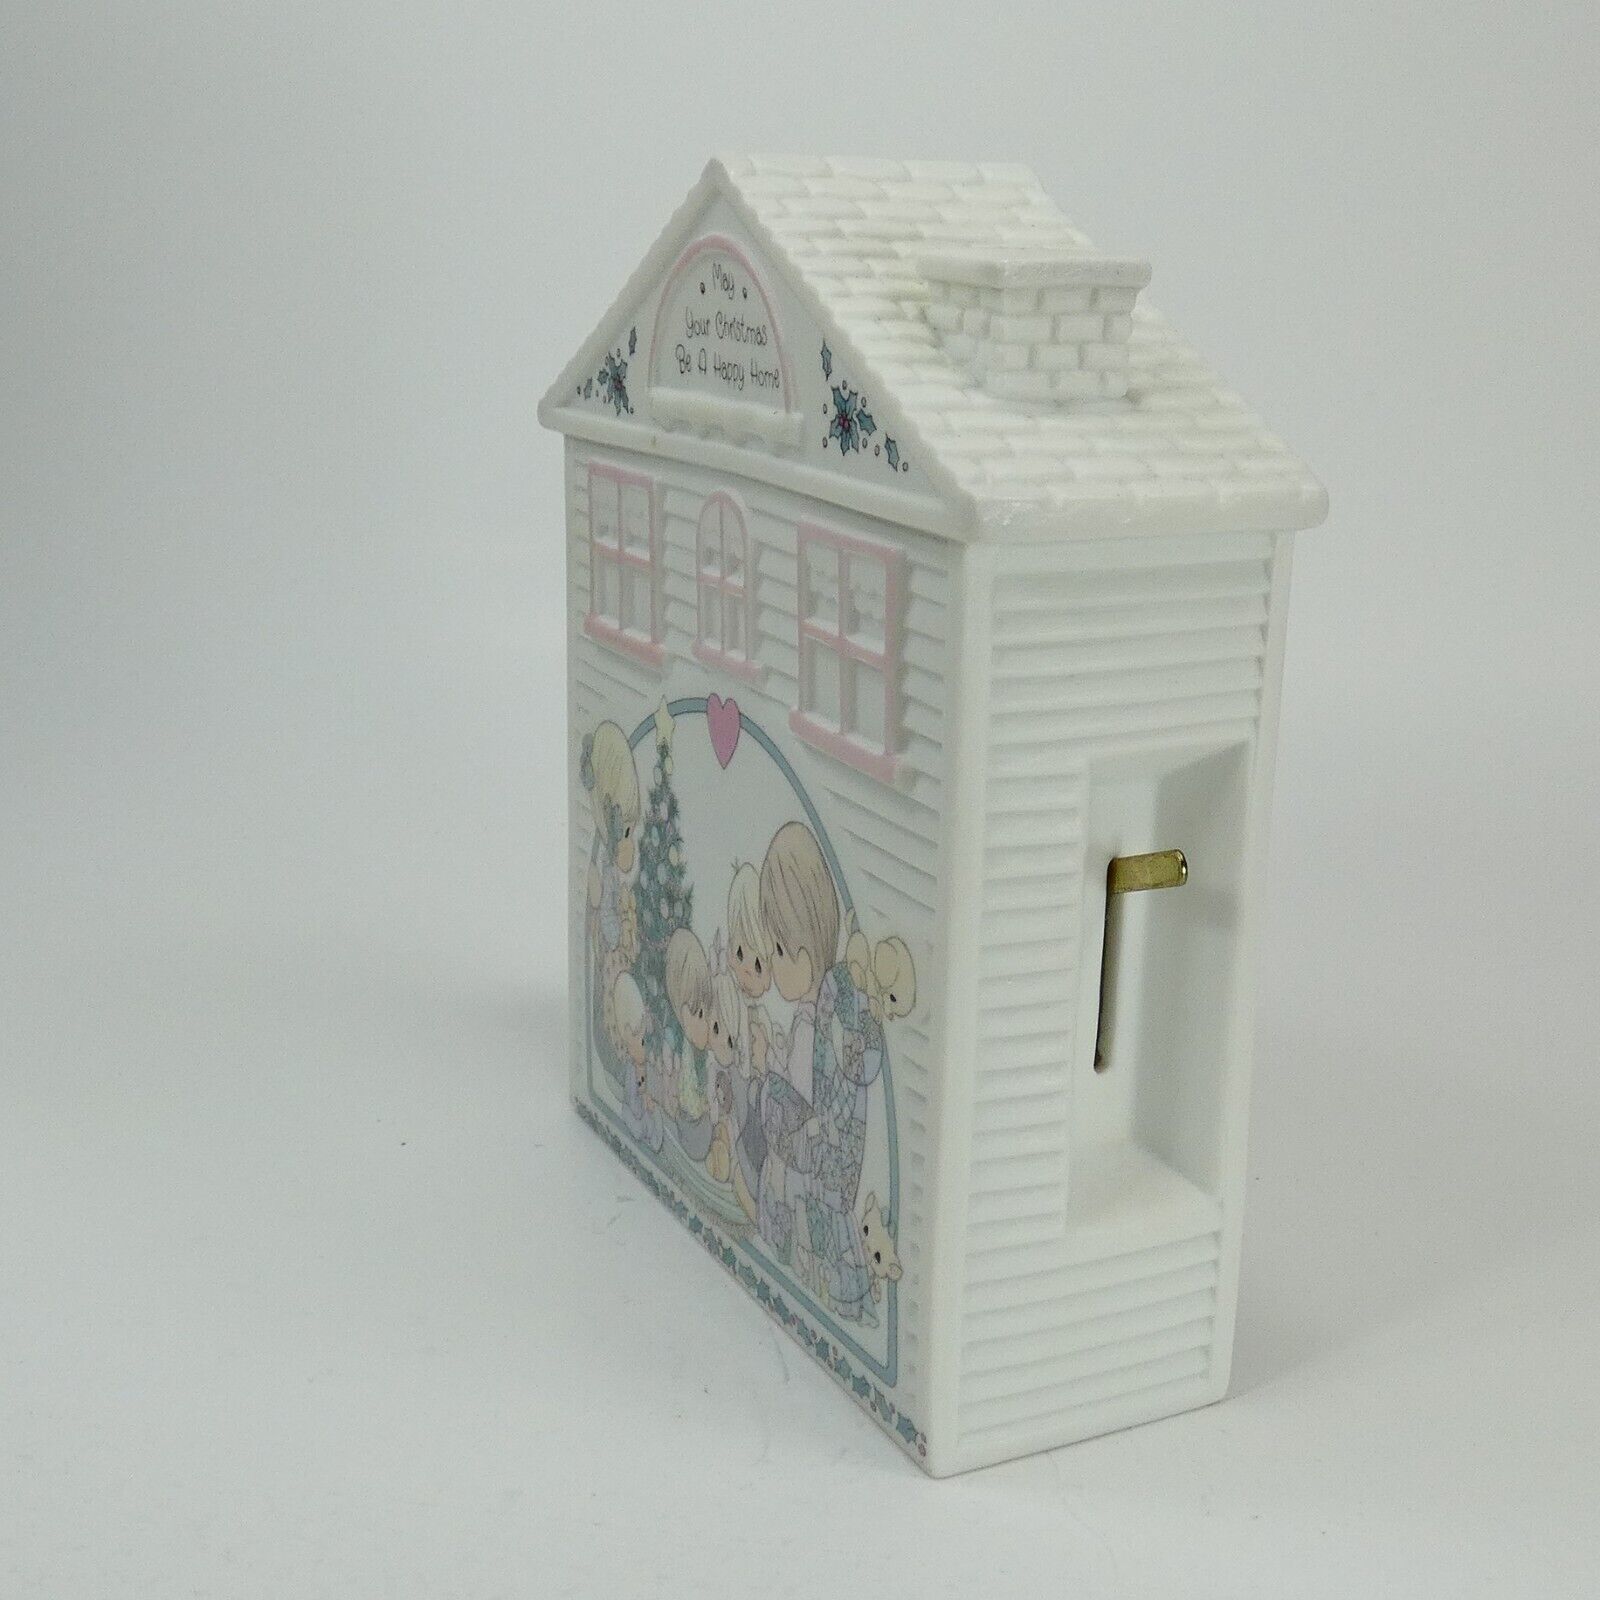 Primary image for Precious Moments Musical “Home for the Holidays” Music Box 1994, Enesco AFHV3